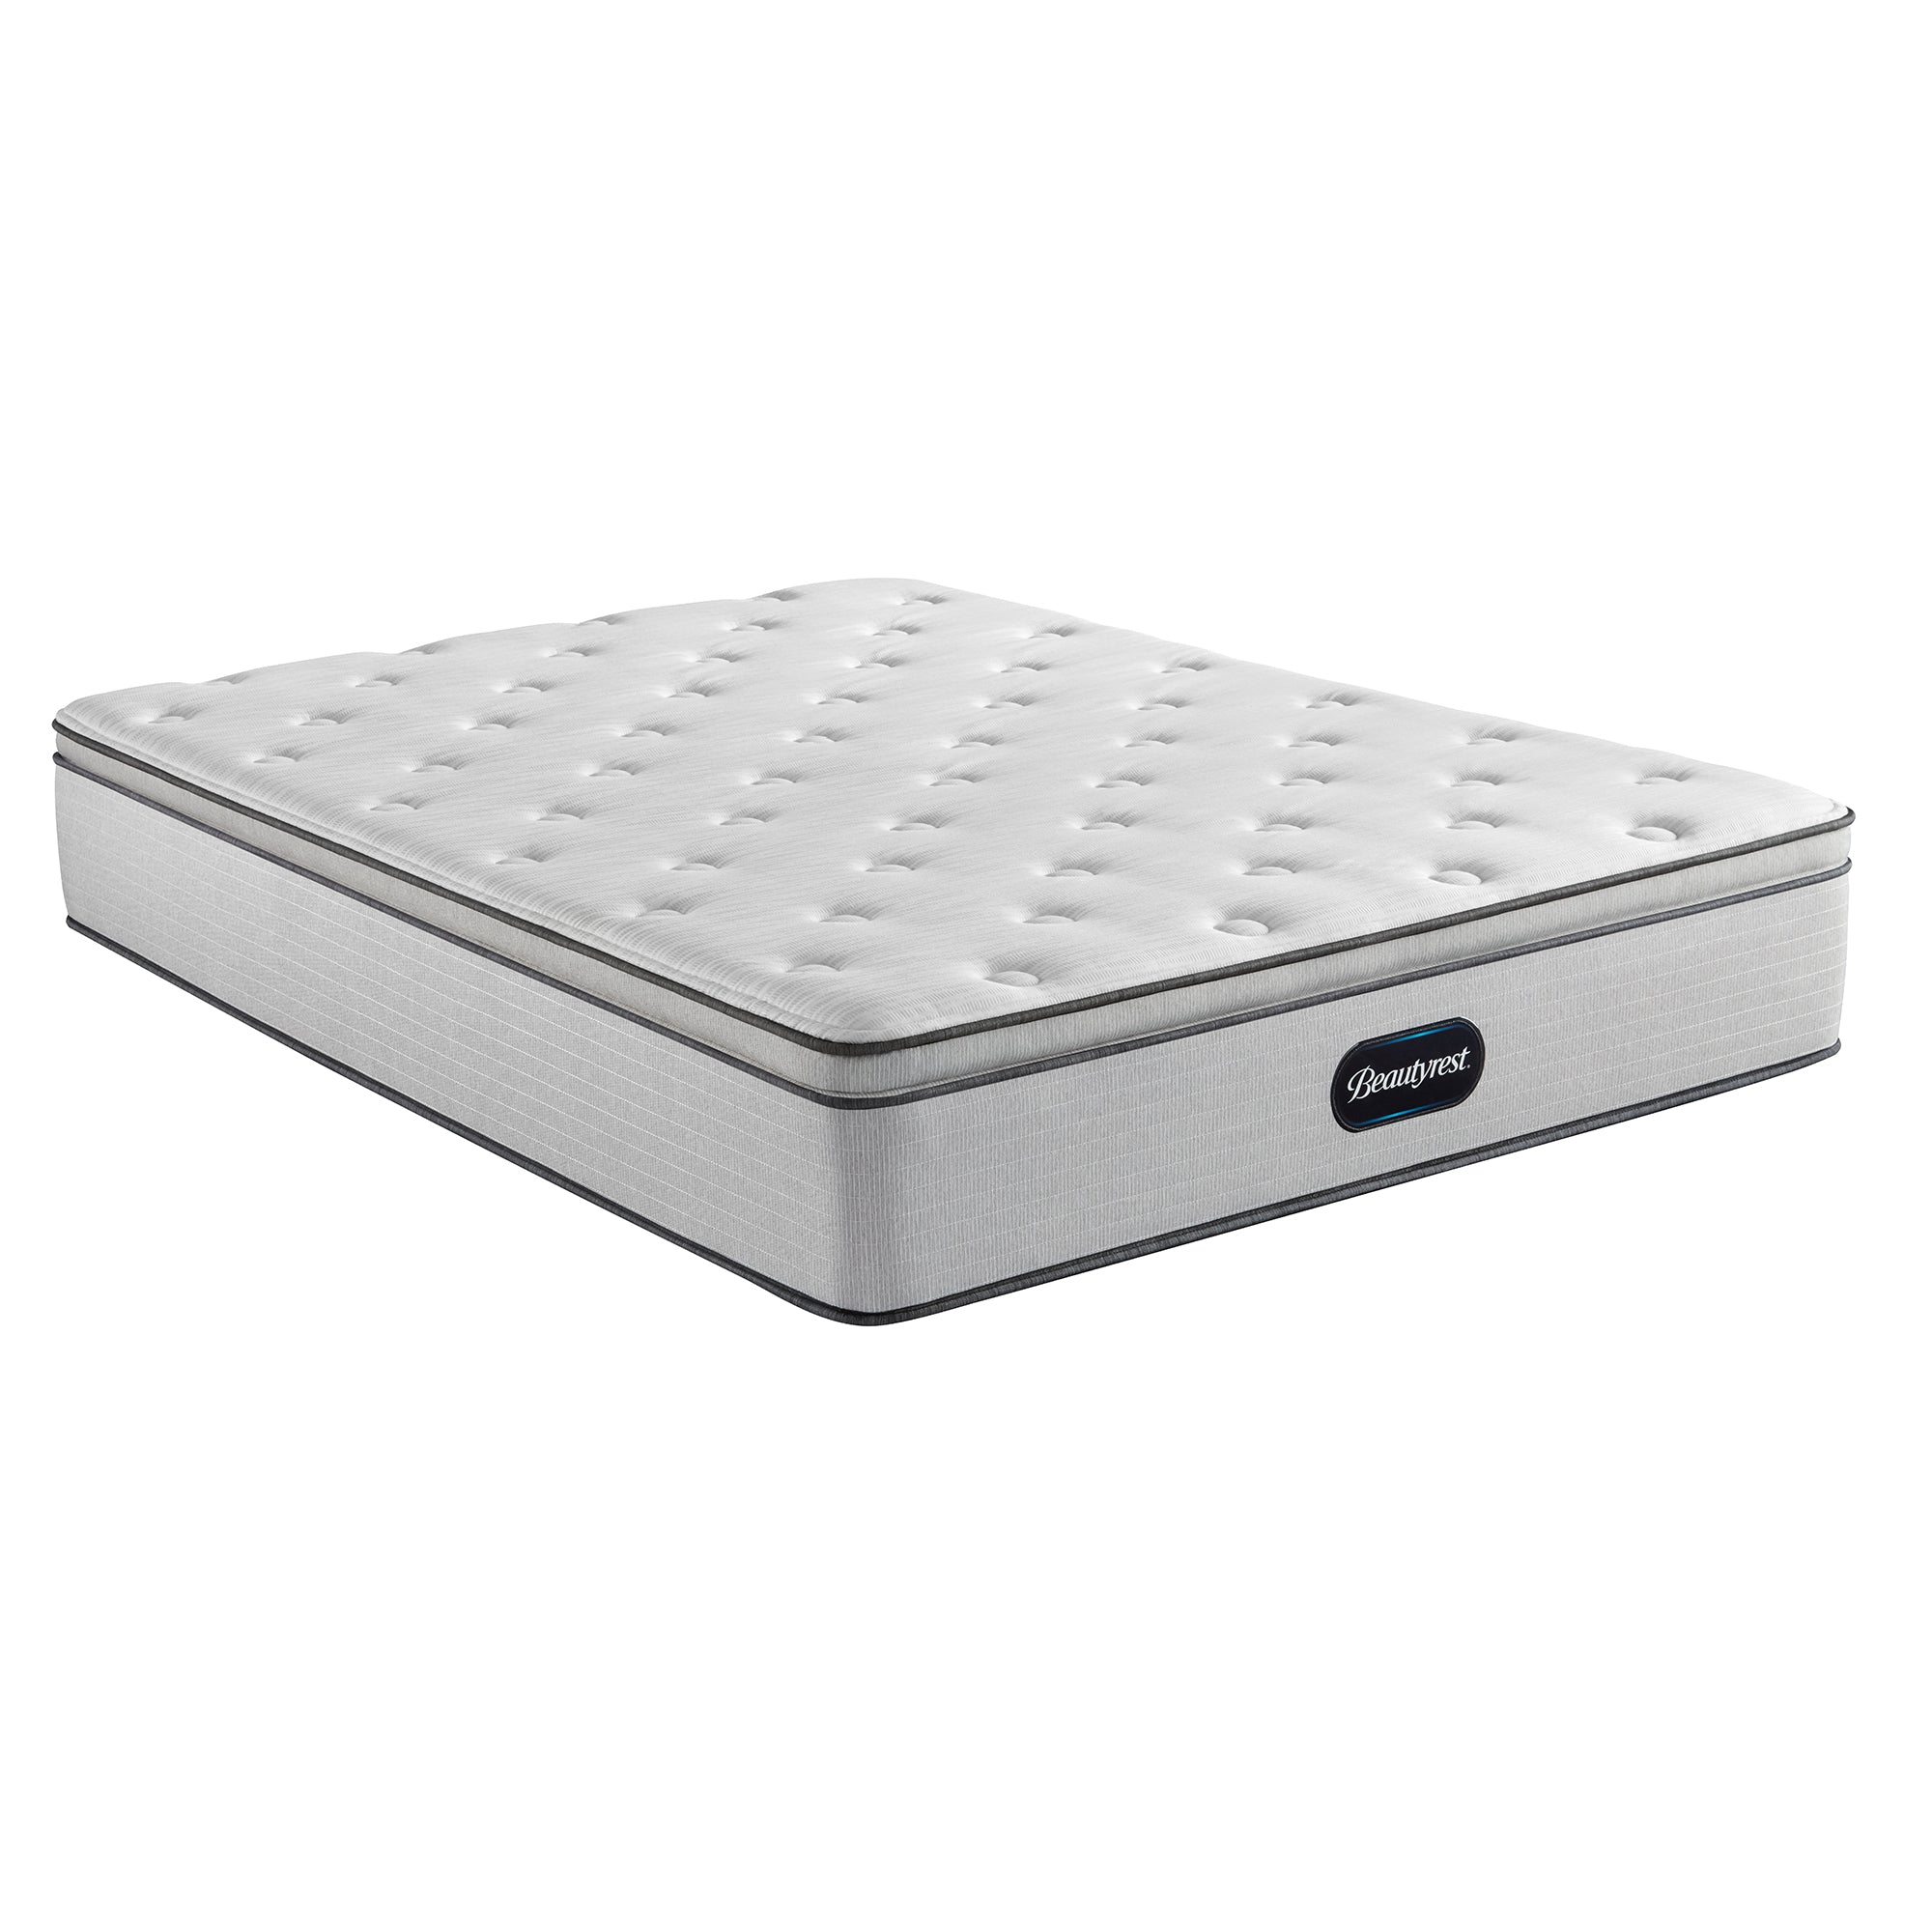 The Beautyrest BR800 Medium Pillow Top mattress alone on a white background